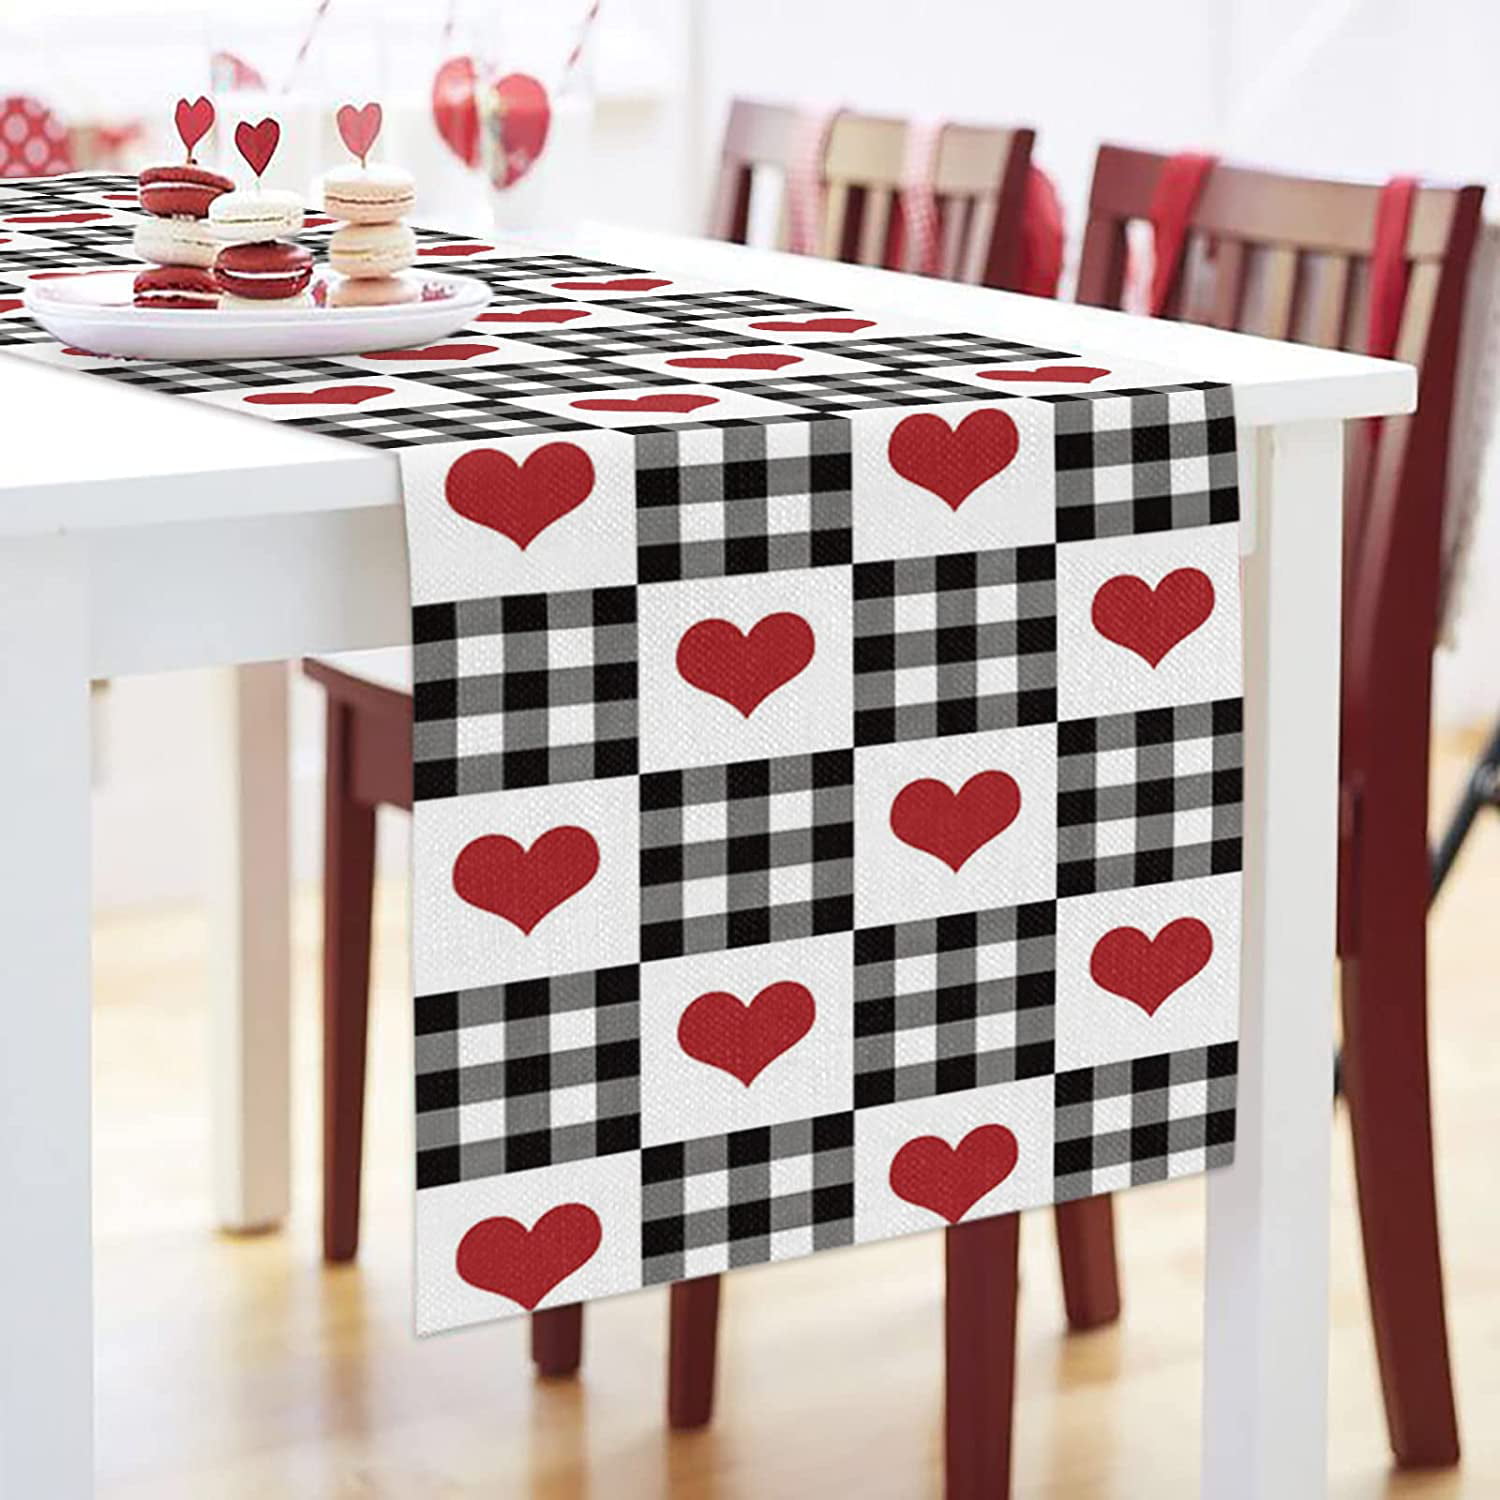 Meet 1998 Cotton Linen Table Runners Valentine's Day Love Heart Tablecovers for Kitchen Garden Wedding Parties Dinner Indoor Outdoors Home Decorations Red 13x90 inches